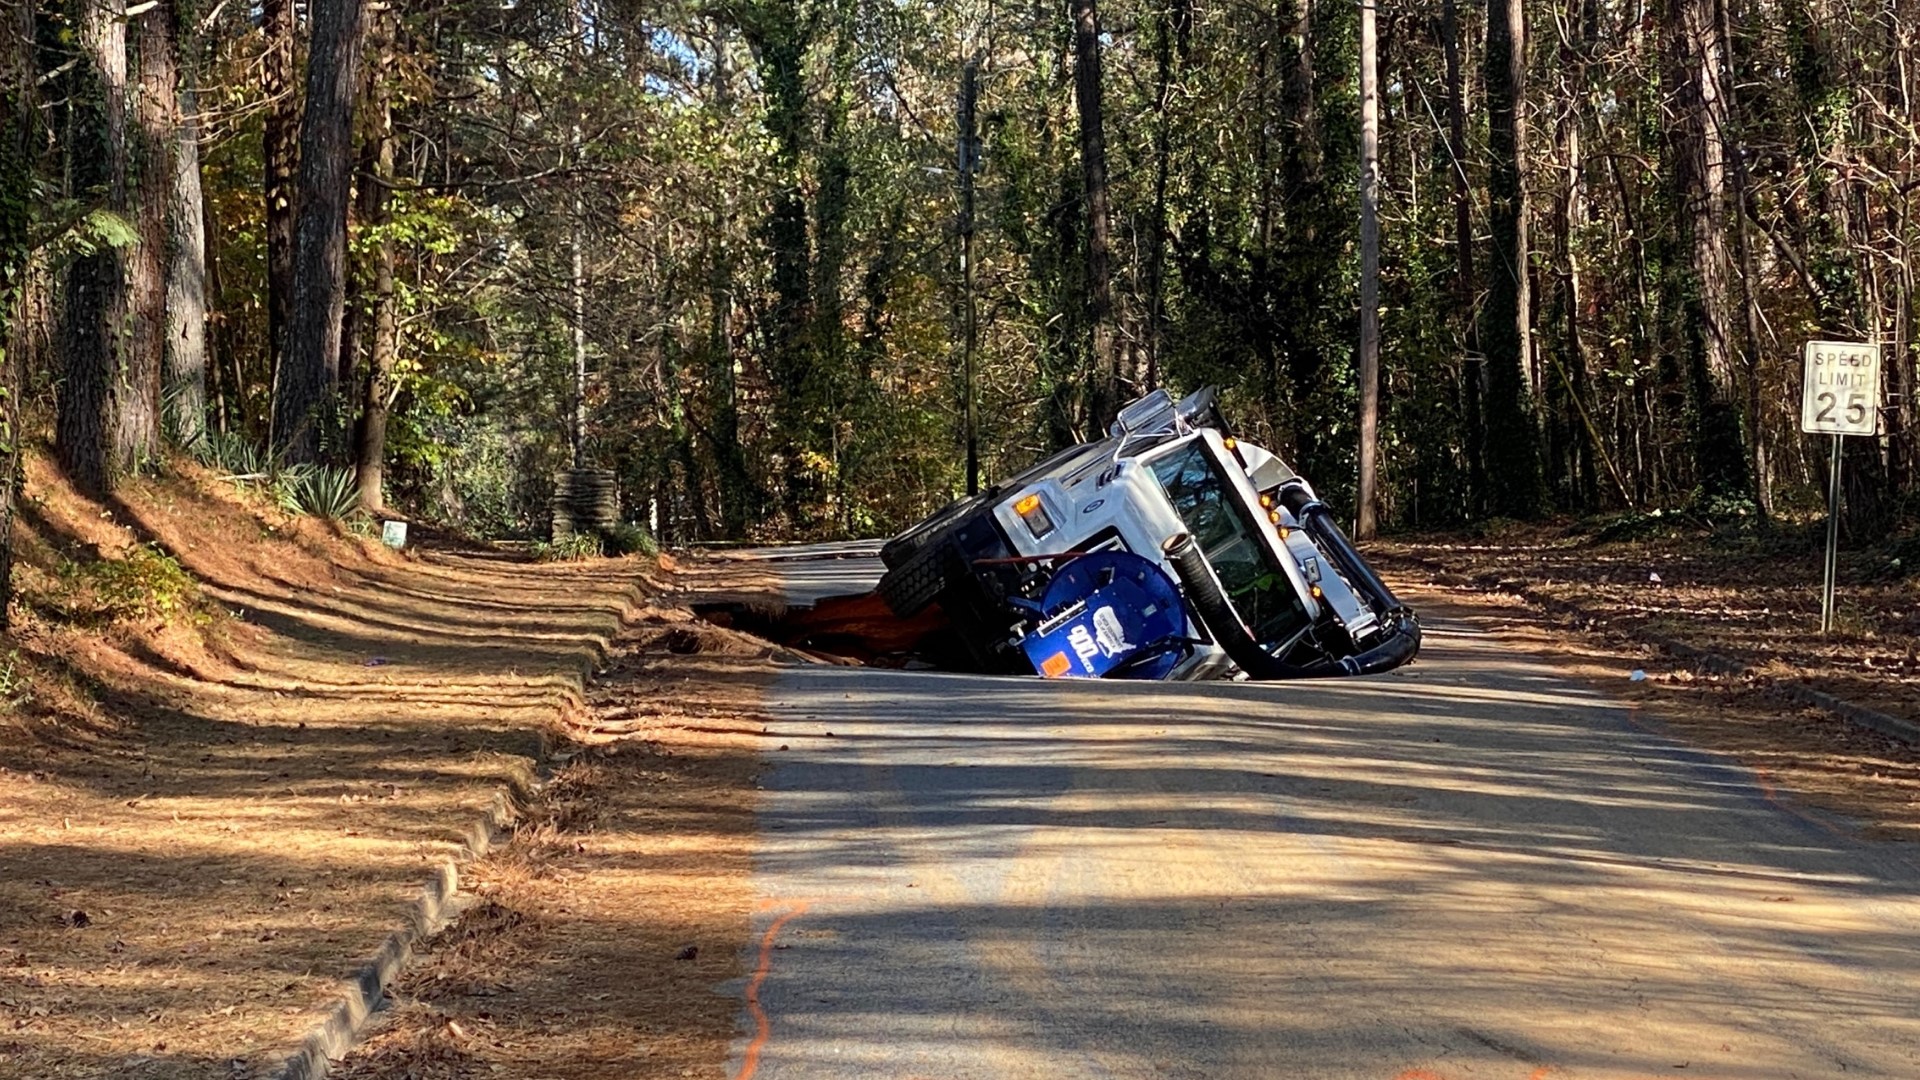 A water main break caused two large sink holes Thursday morning, essentially swallowing a large truck, City of South Fulton officials said.